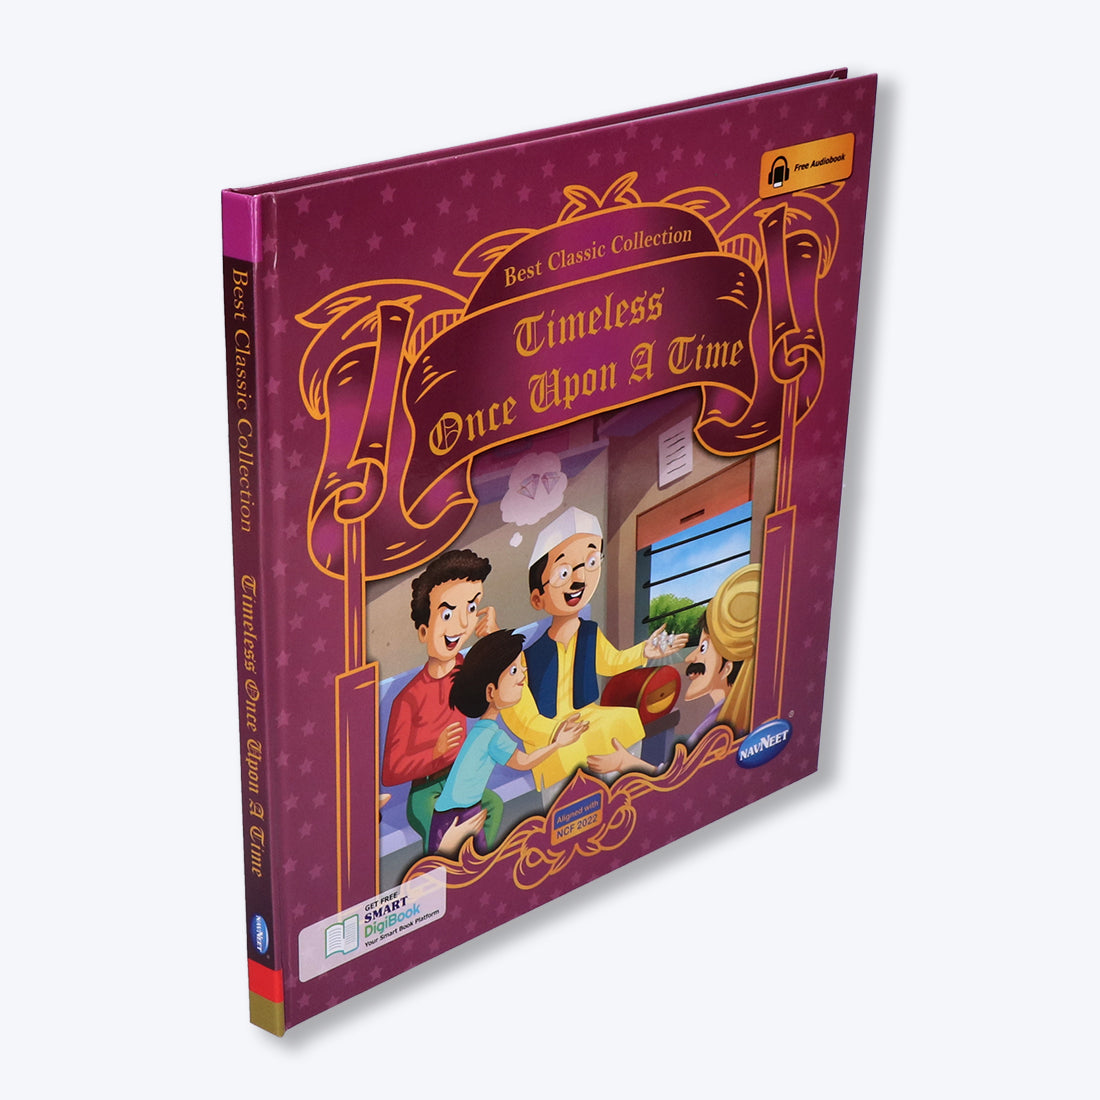 Navneet Best Classic Collection- Timeless Once Upon A Time Vocabulary Words- With Colourful Illustrations- Read aloud stories- Bedtime Stories- Audio Book- Social-Emotional